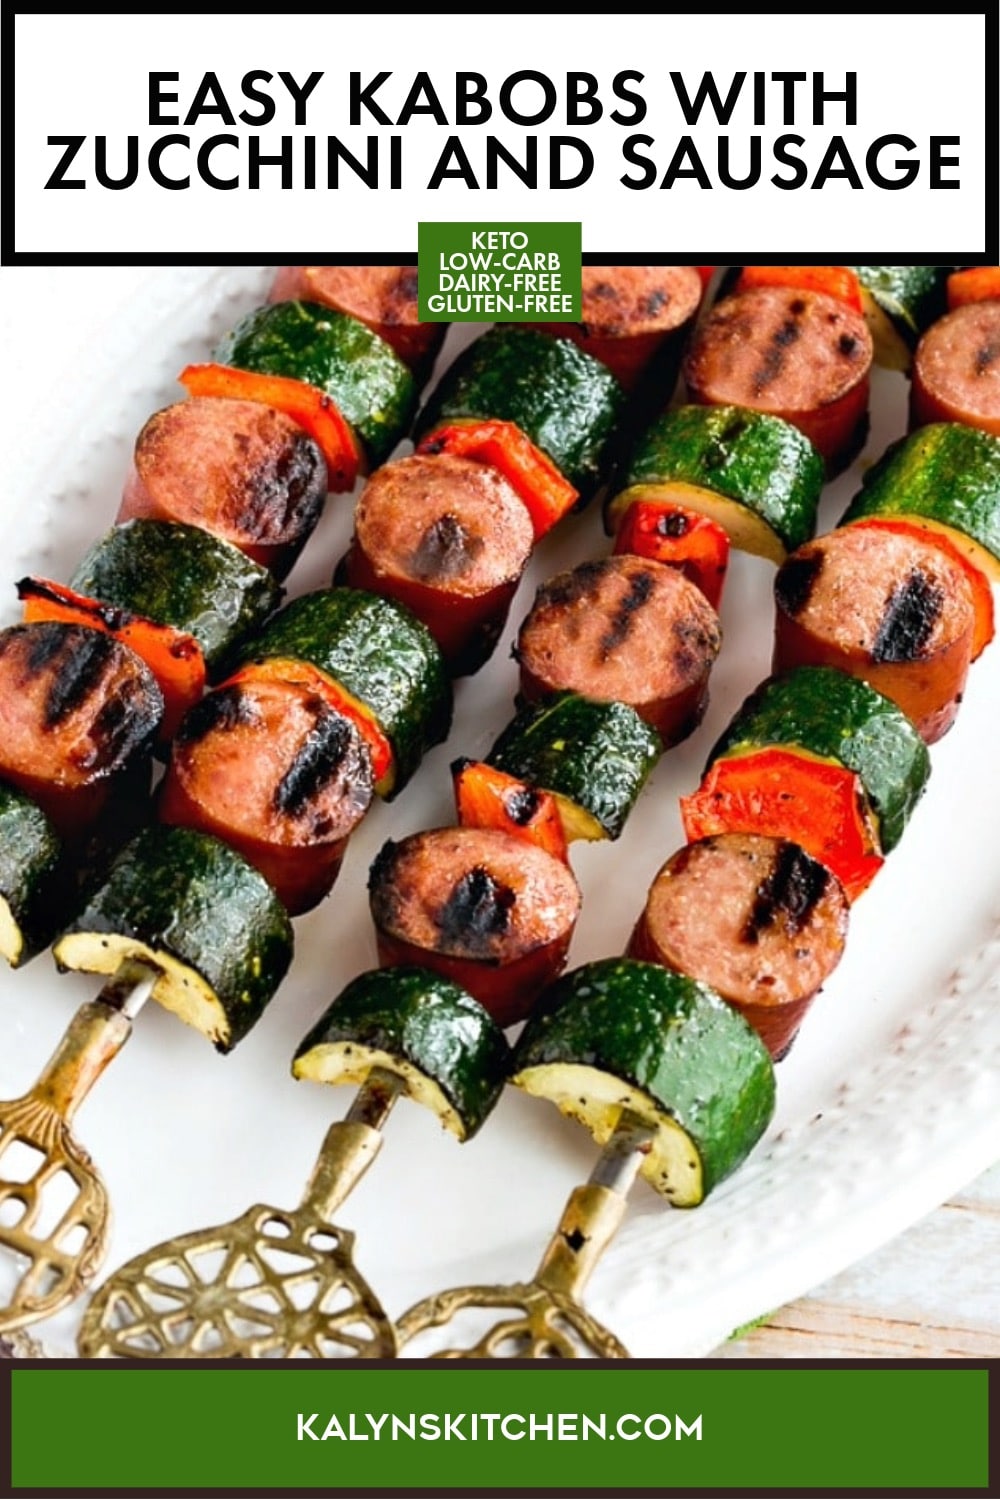 Pinterest image of Easy Kabobs with Zucchini and Sausage